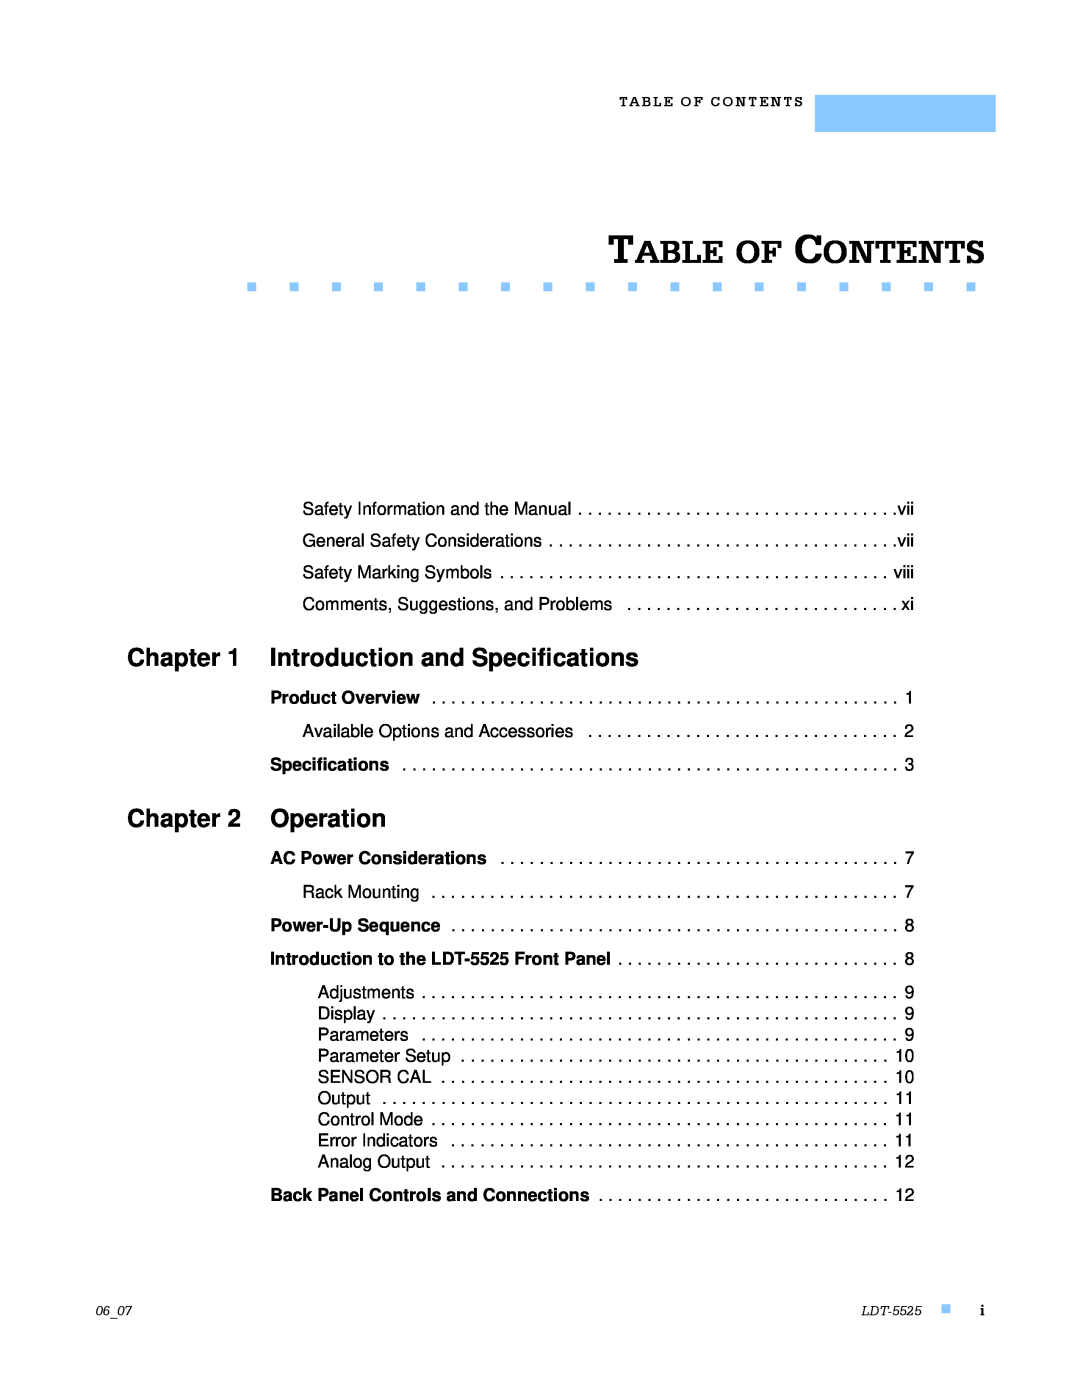 Lightwave Communications LDT-5525 manual Table Of Contents, Introduction and Specifications, Operation 